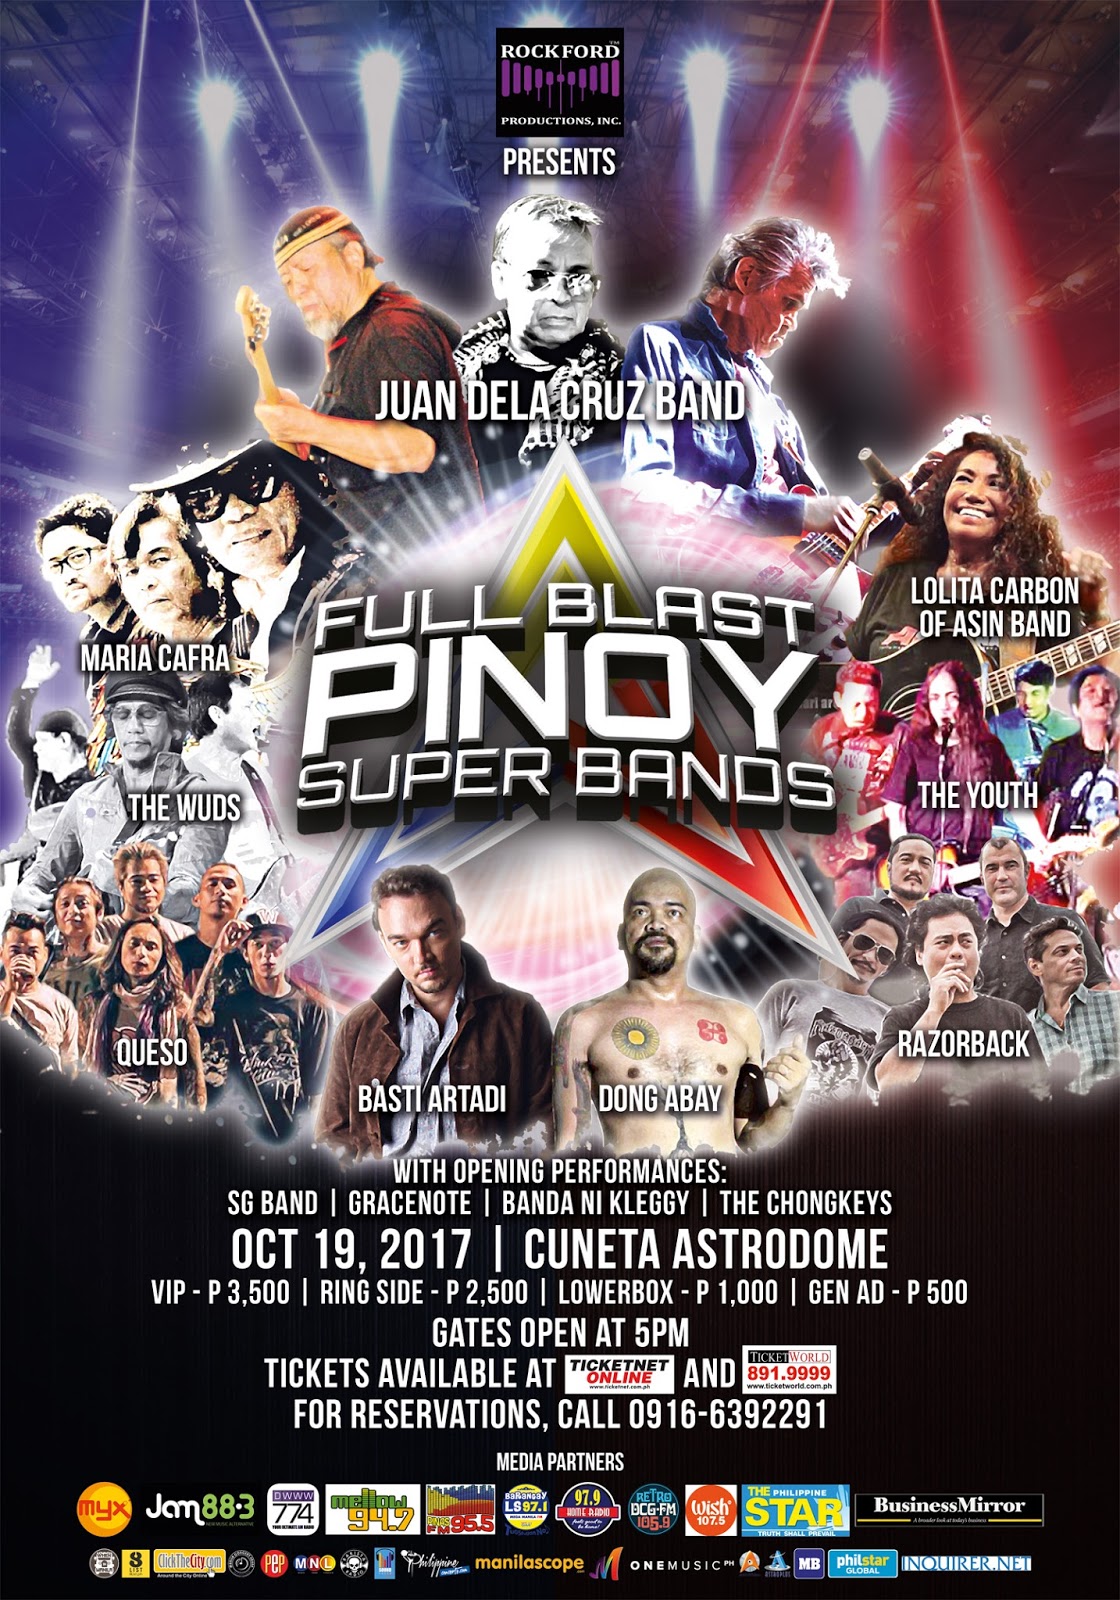 Legendary Bands, Rock Icons Come Together for First Ever Pinoy Super